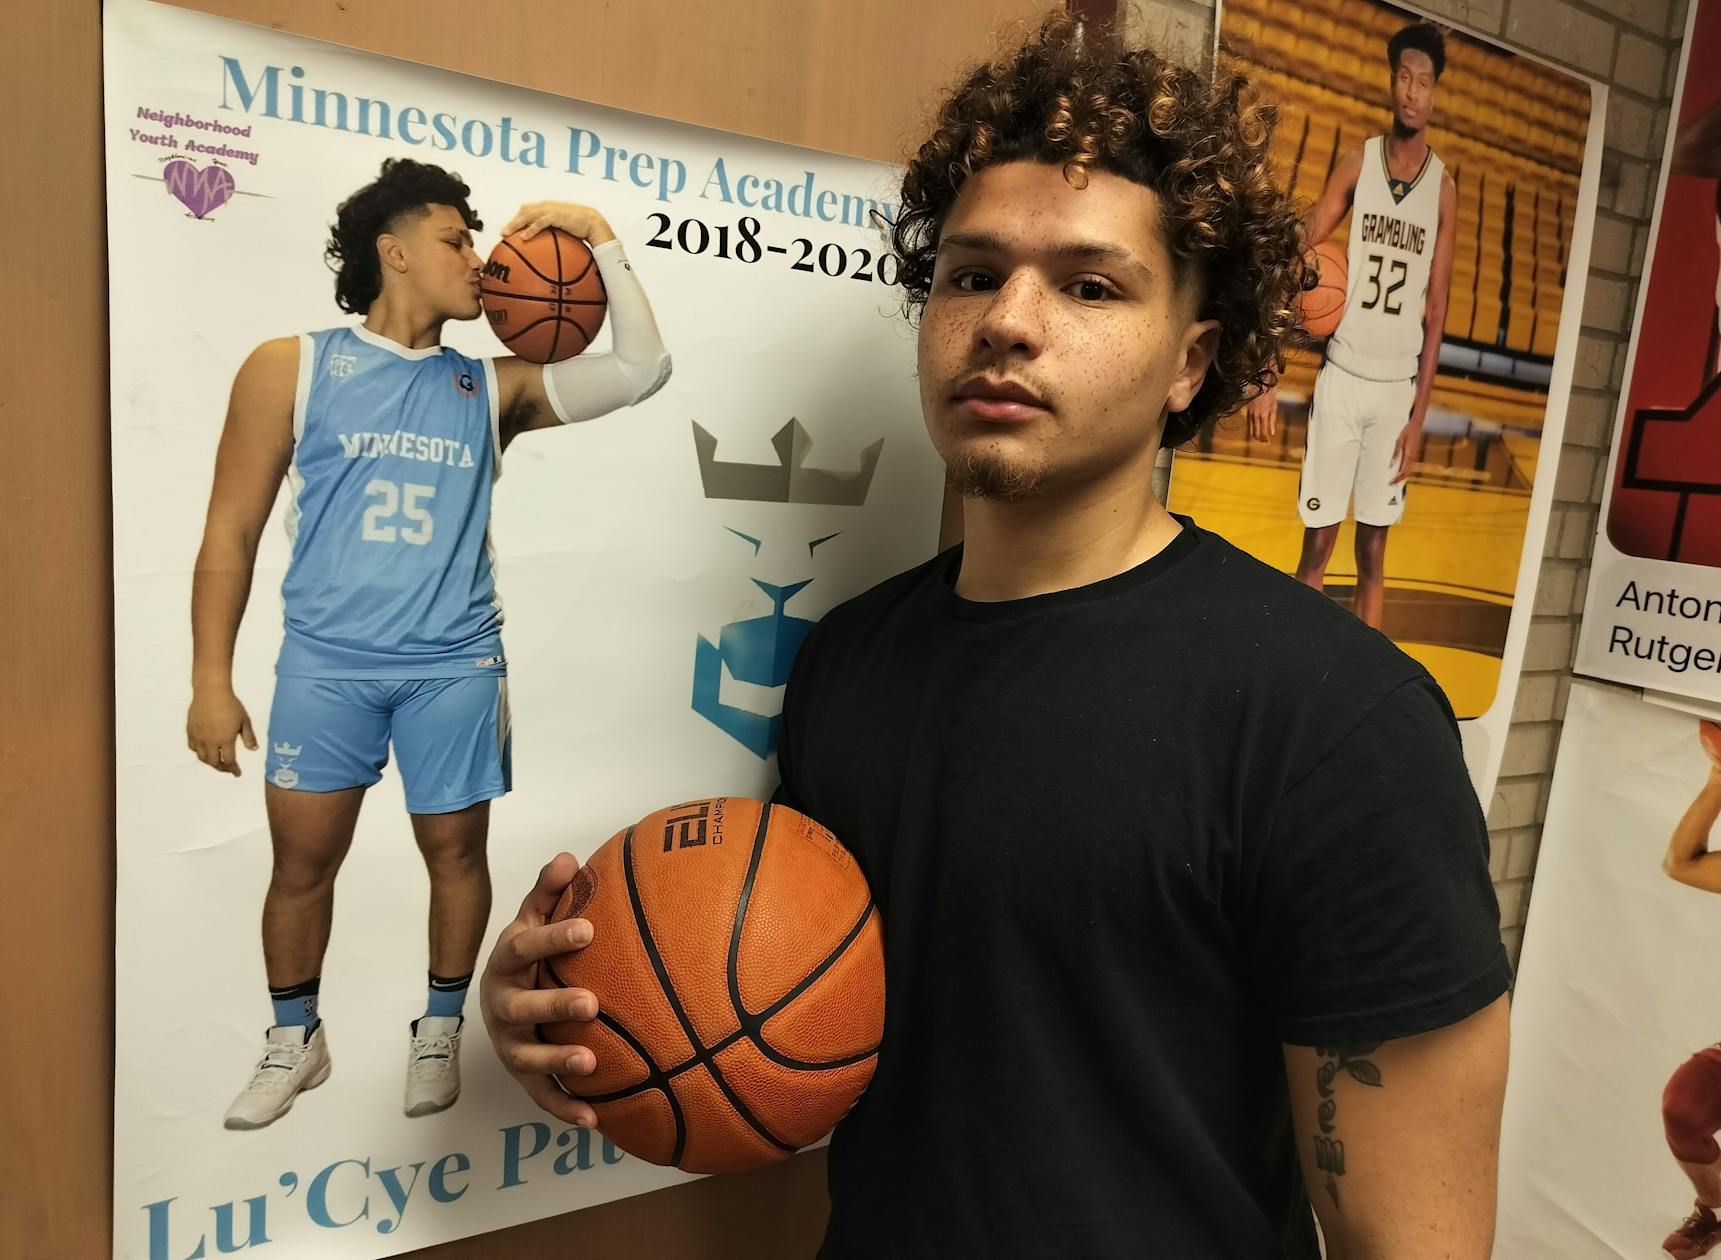 Lu'Cye Patterson looks to lead Gophers men's basketball the way he led at Minnesota Prep Academy